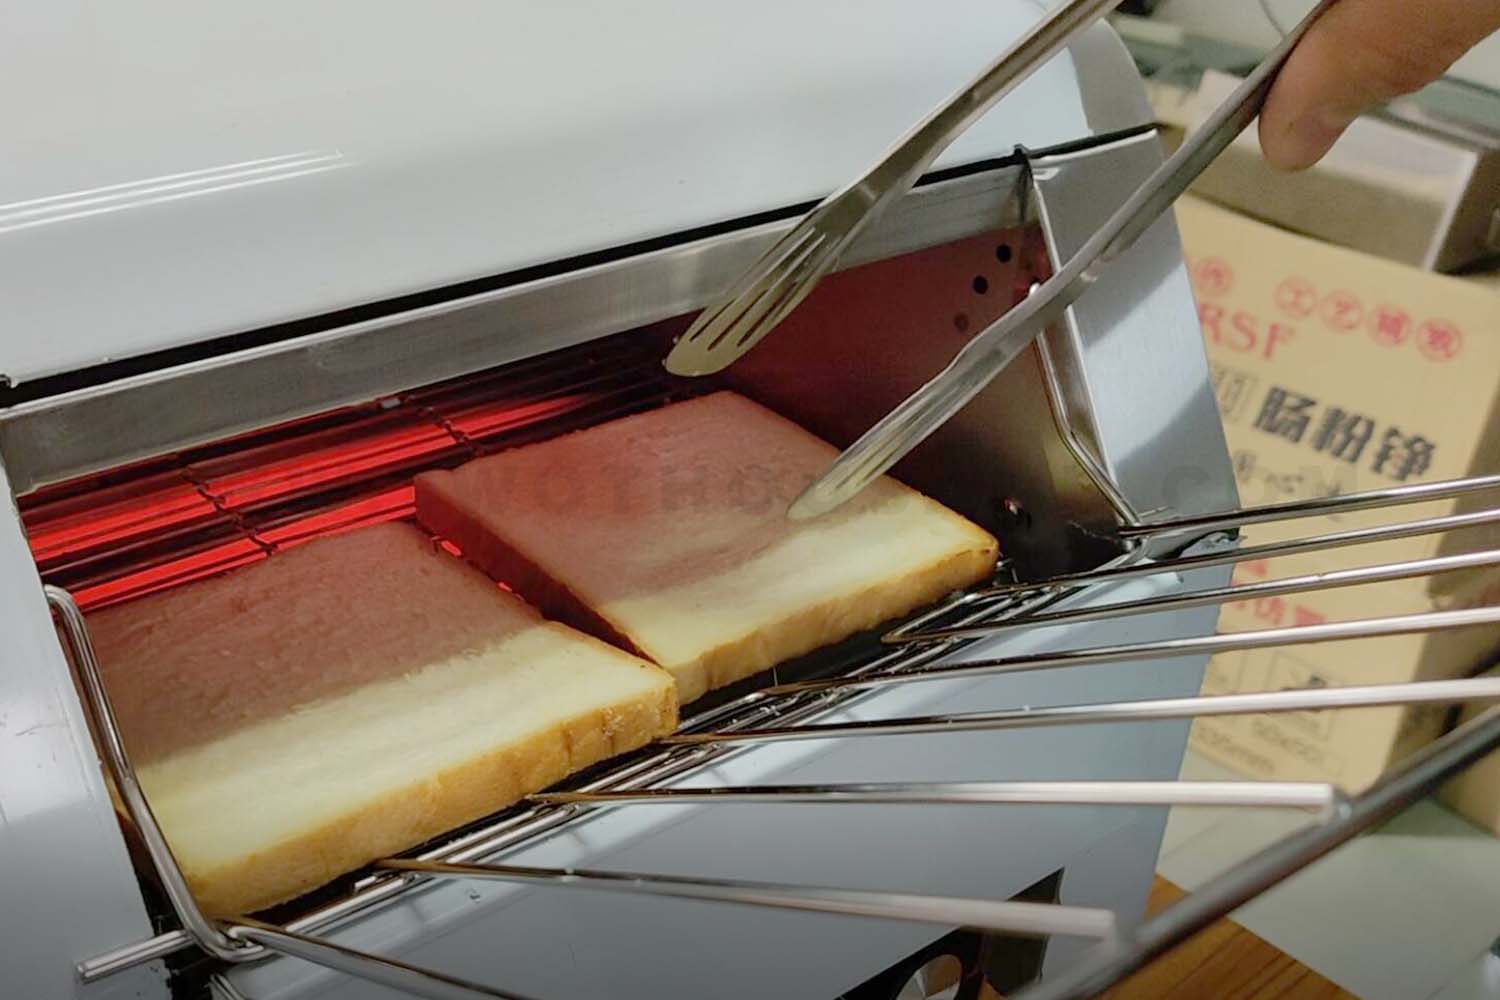 More View of Commercial Conveyor Toaster